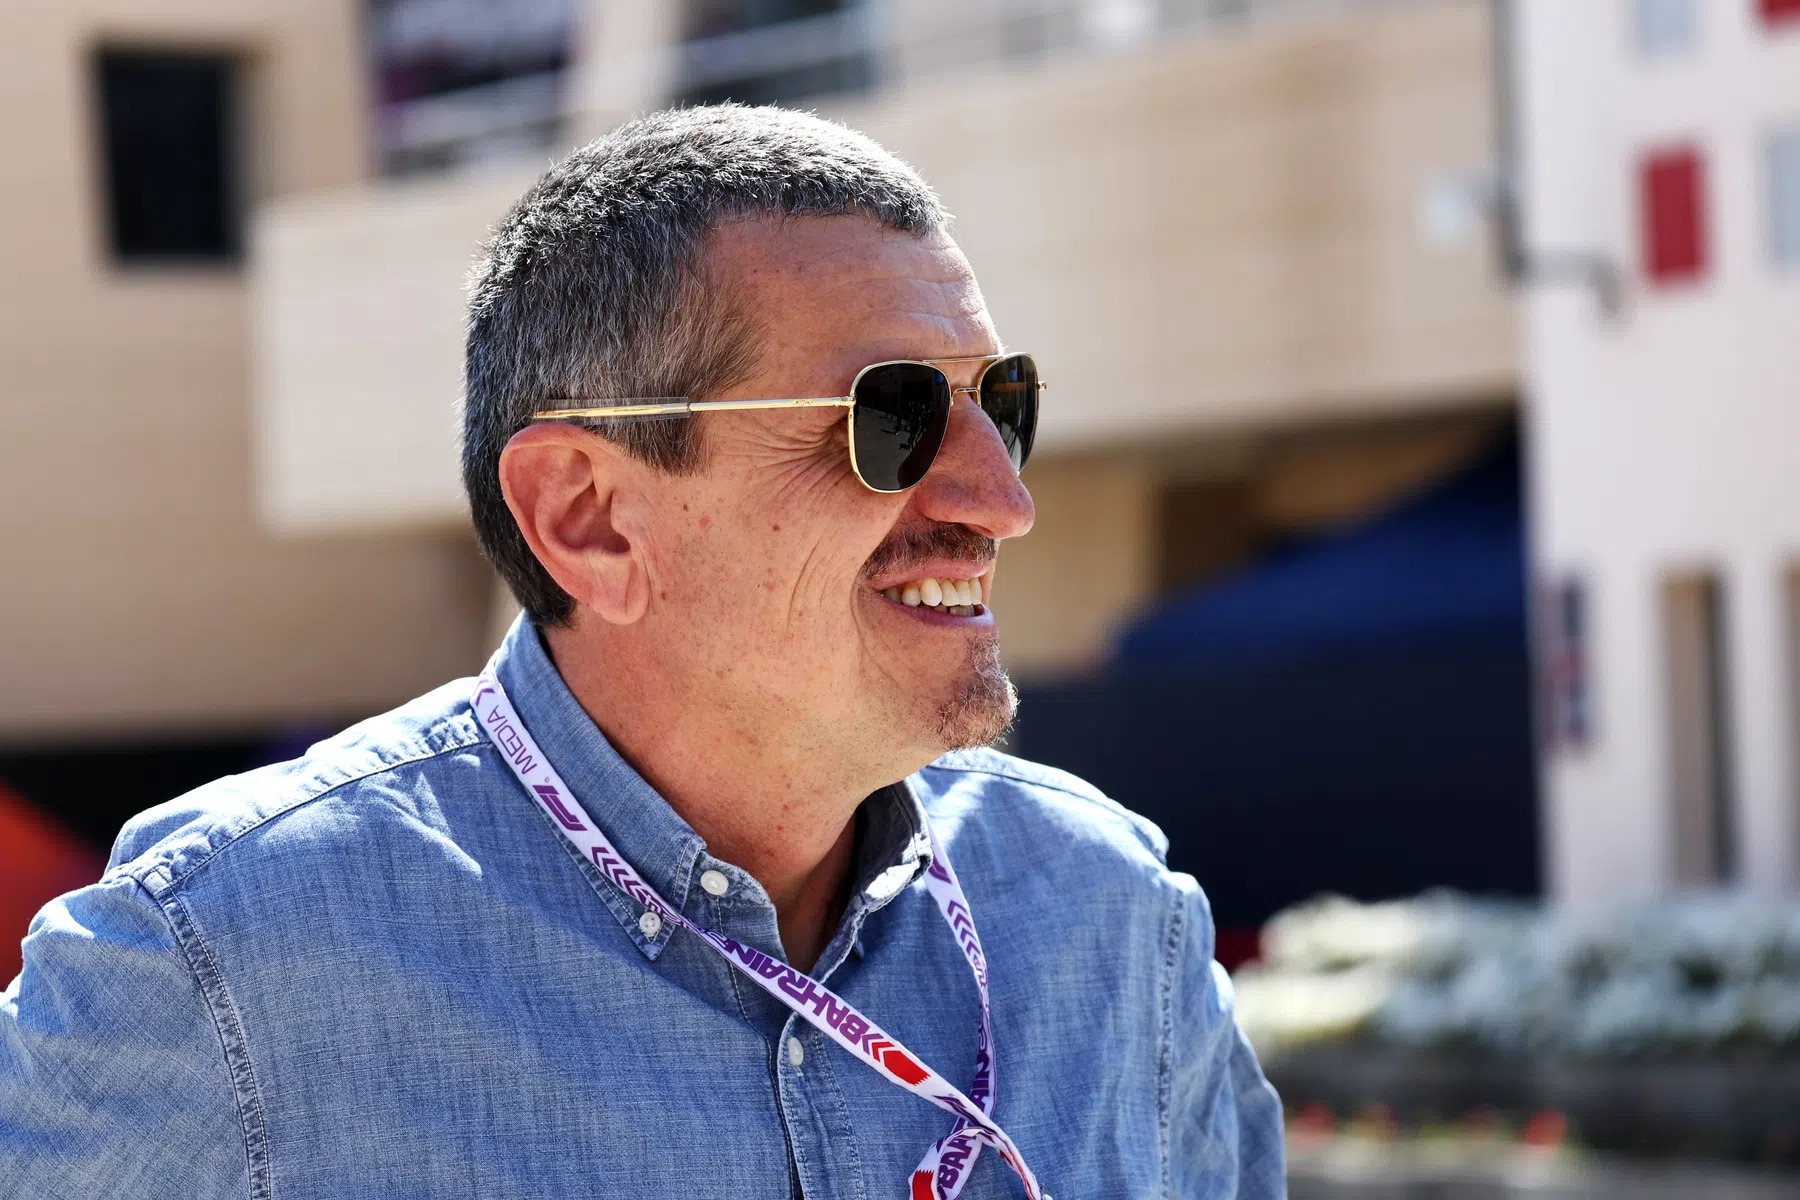 Former Haas boss Guenther Steiner on returning to Formula 1